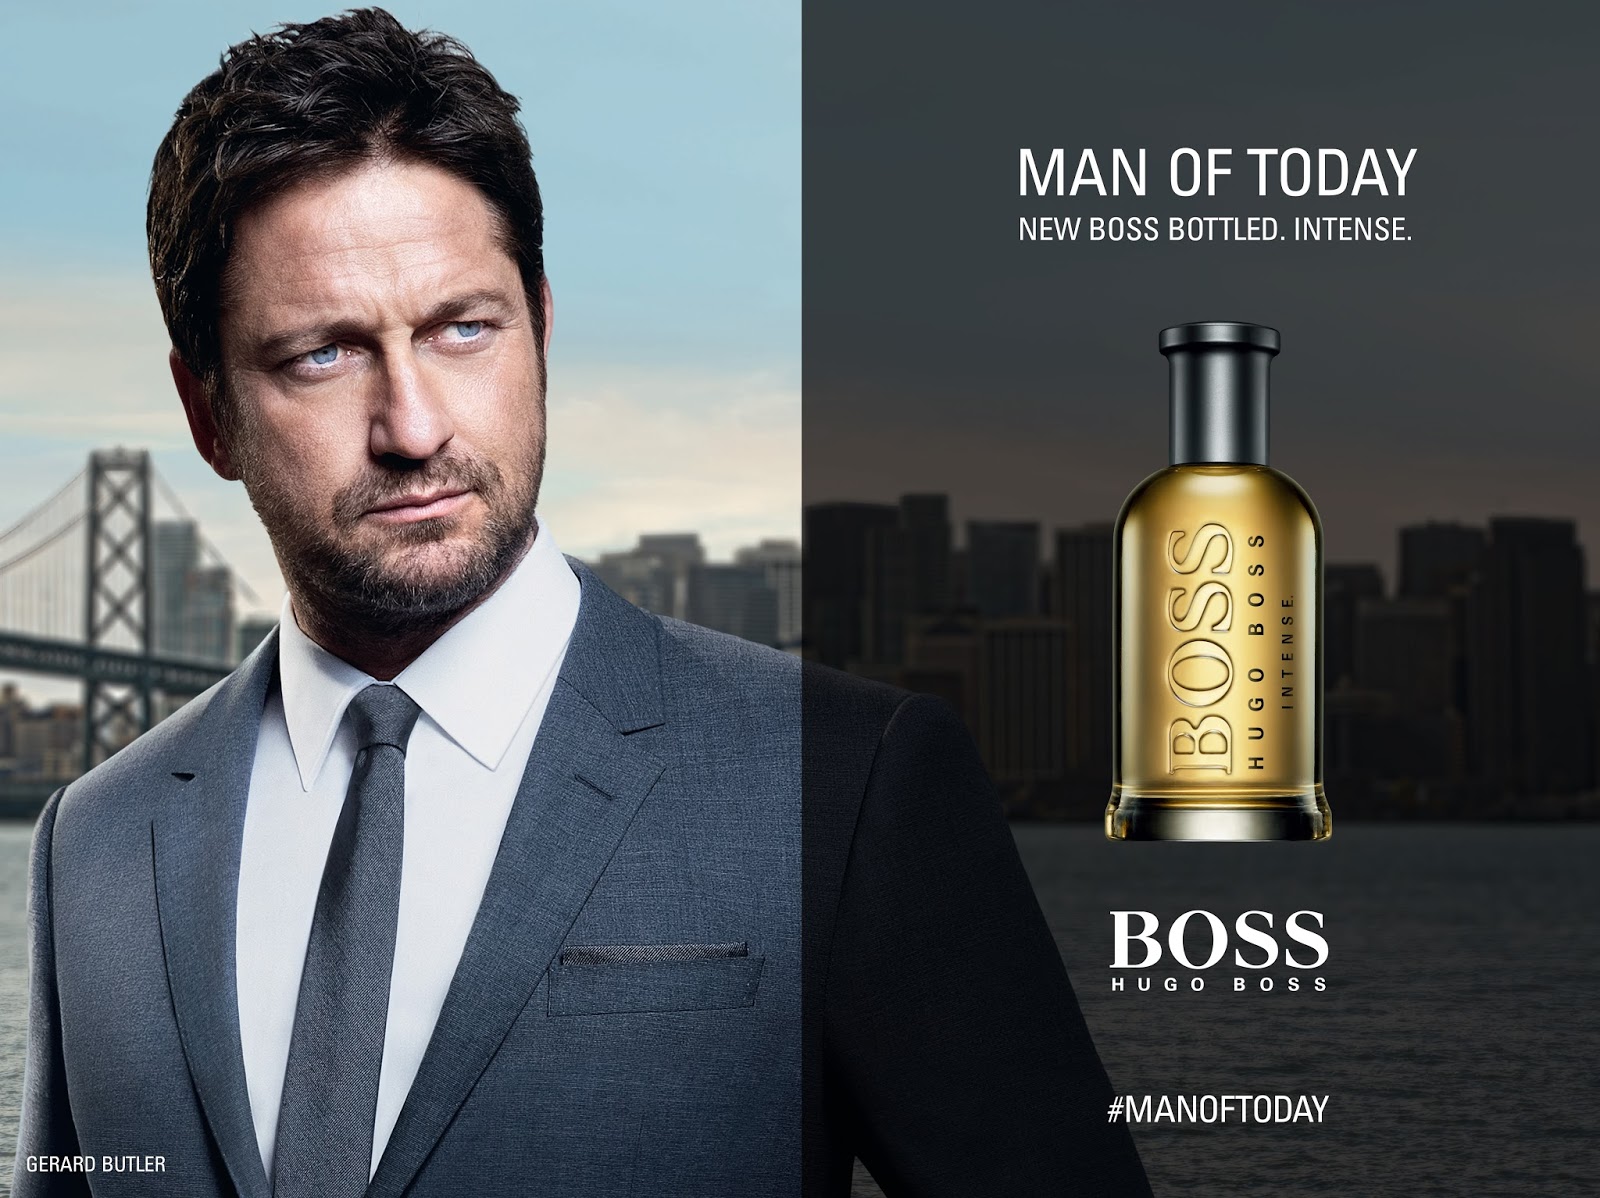 WHO IS THE BOSS Bottled Man?